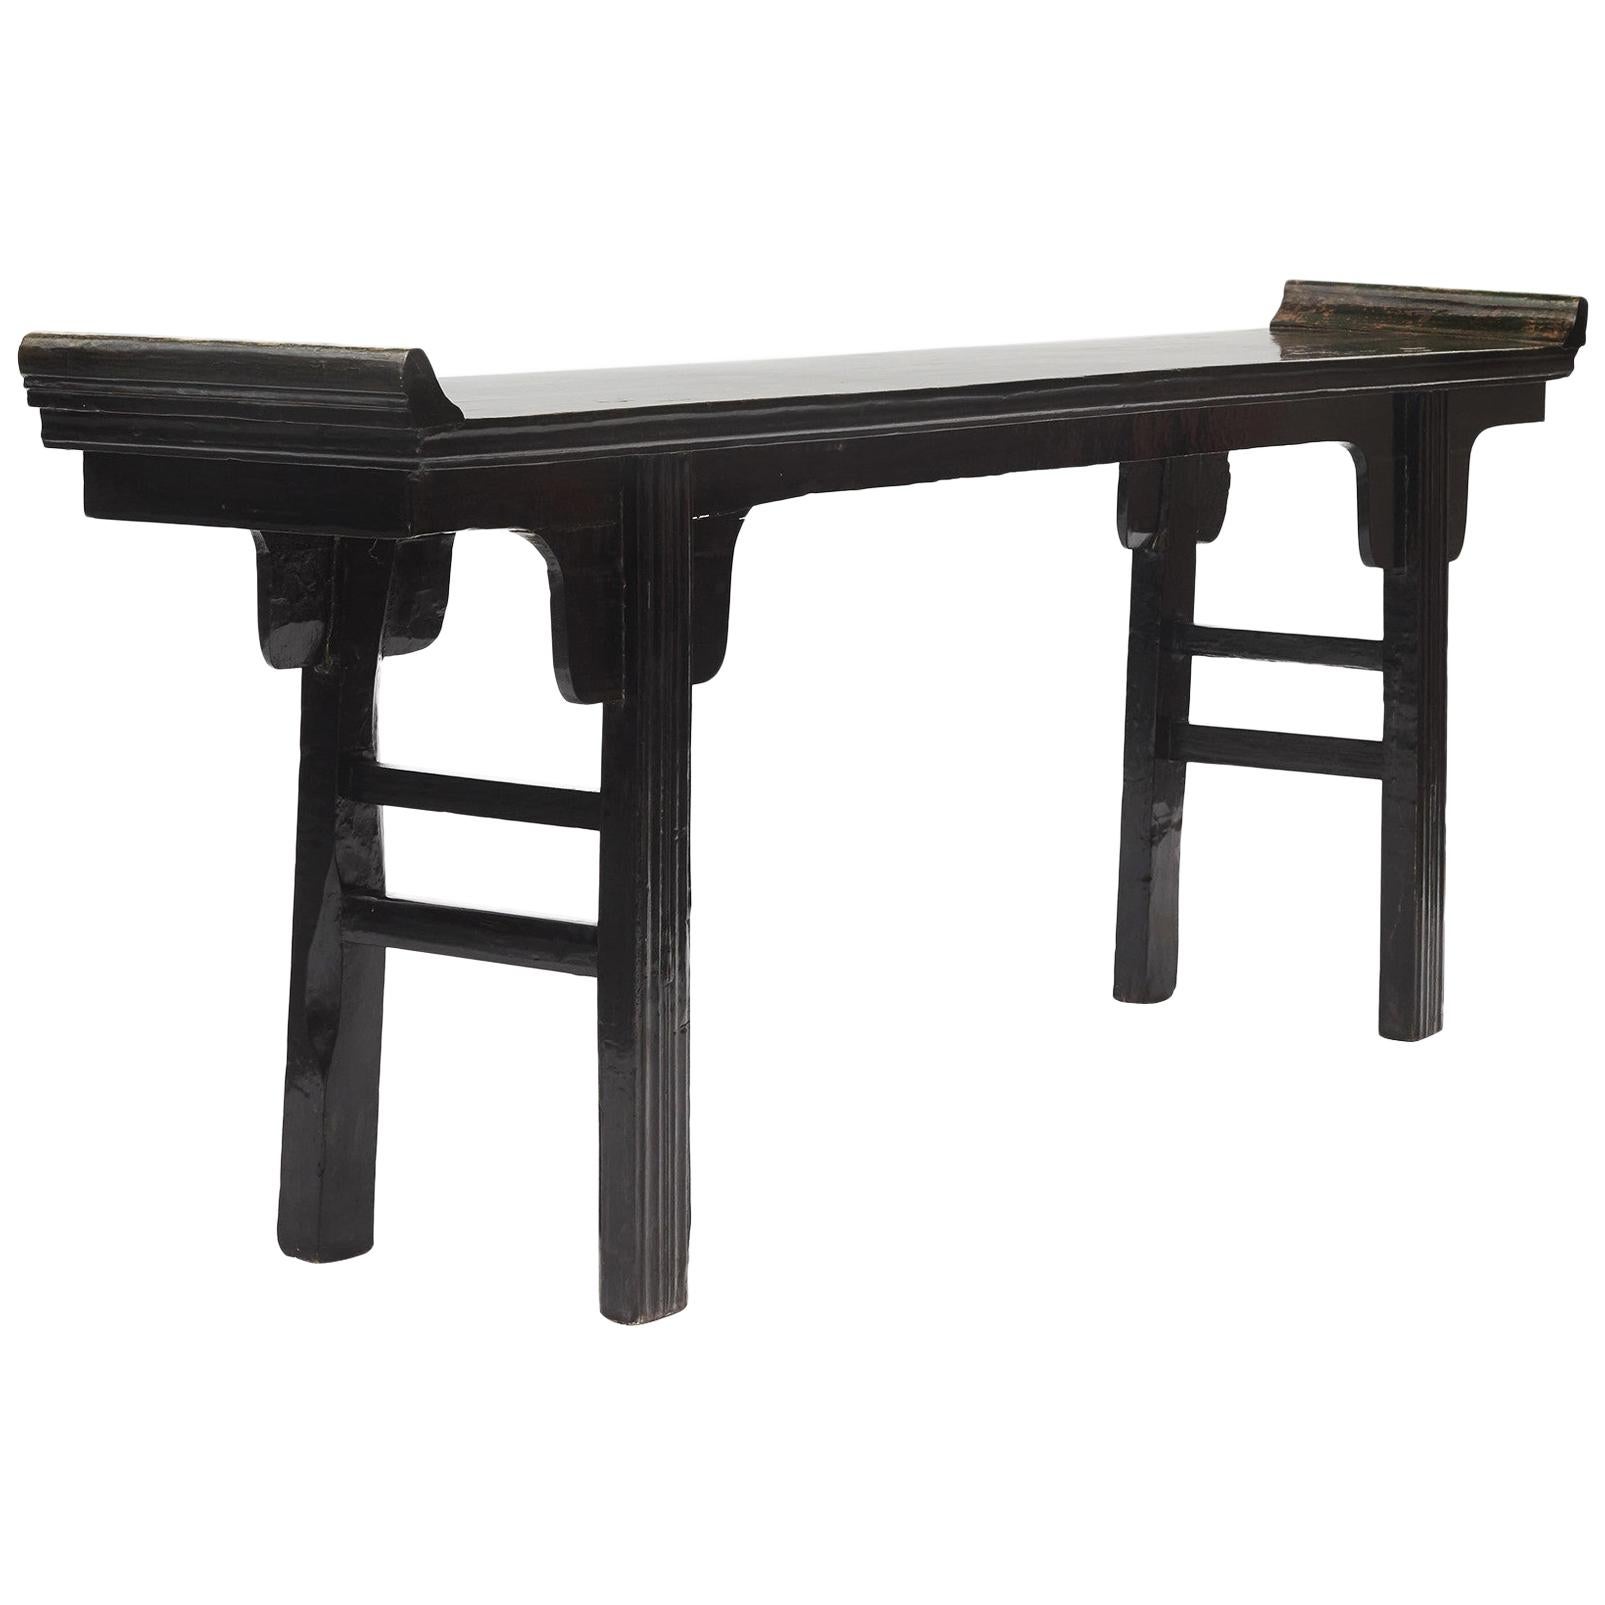 Black & Green Lacquer Consol Table, Shandong, 1830-1840